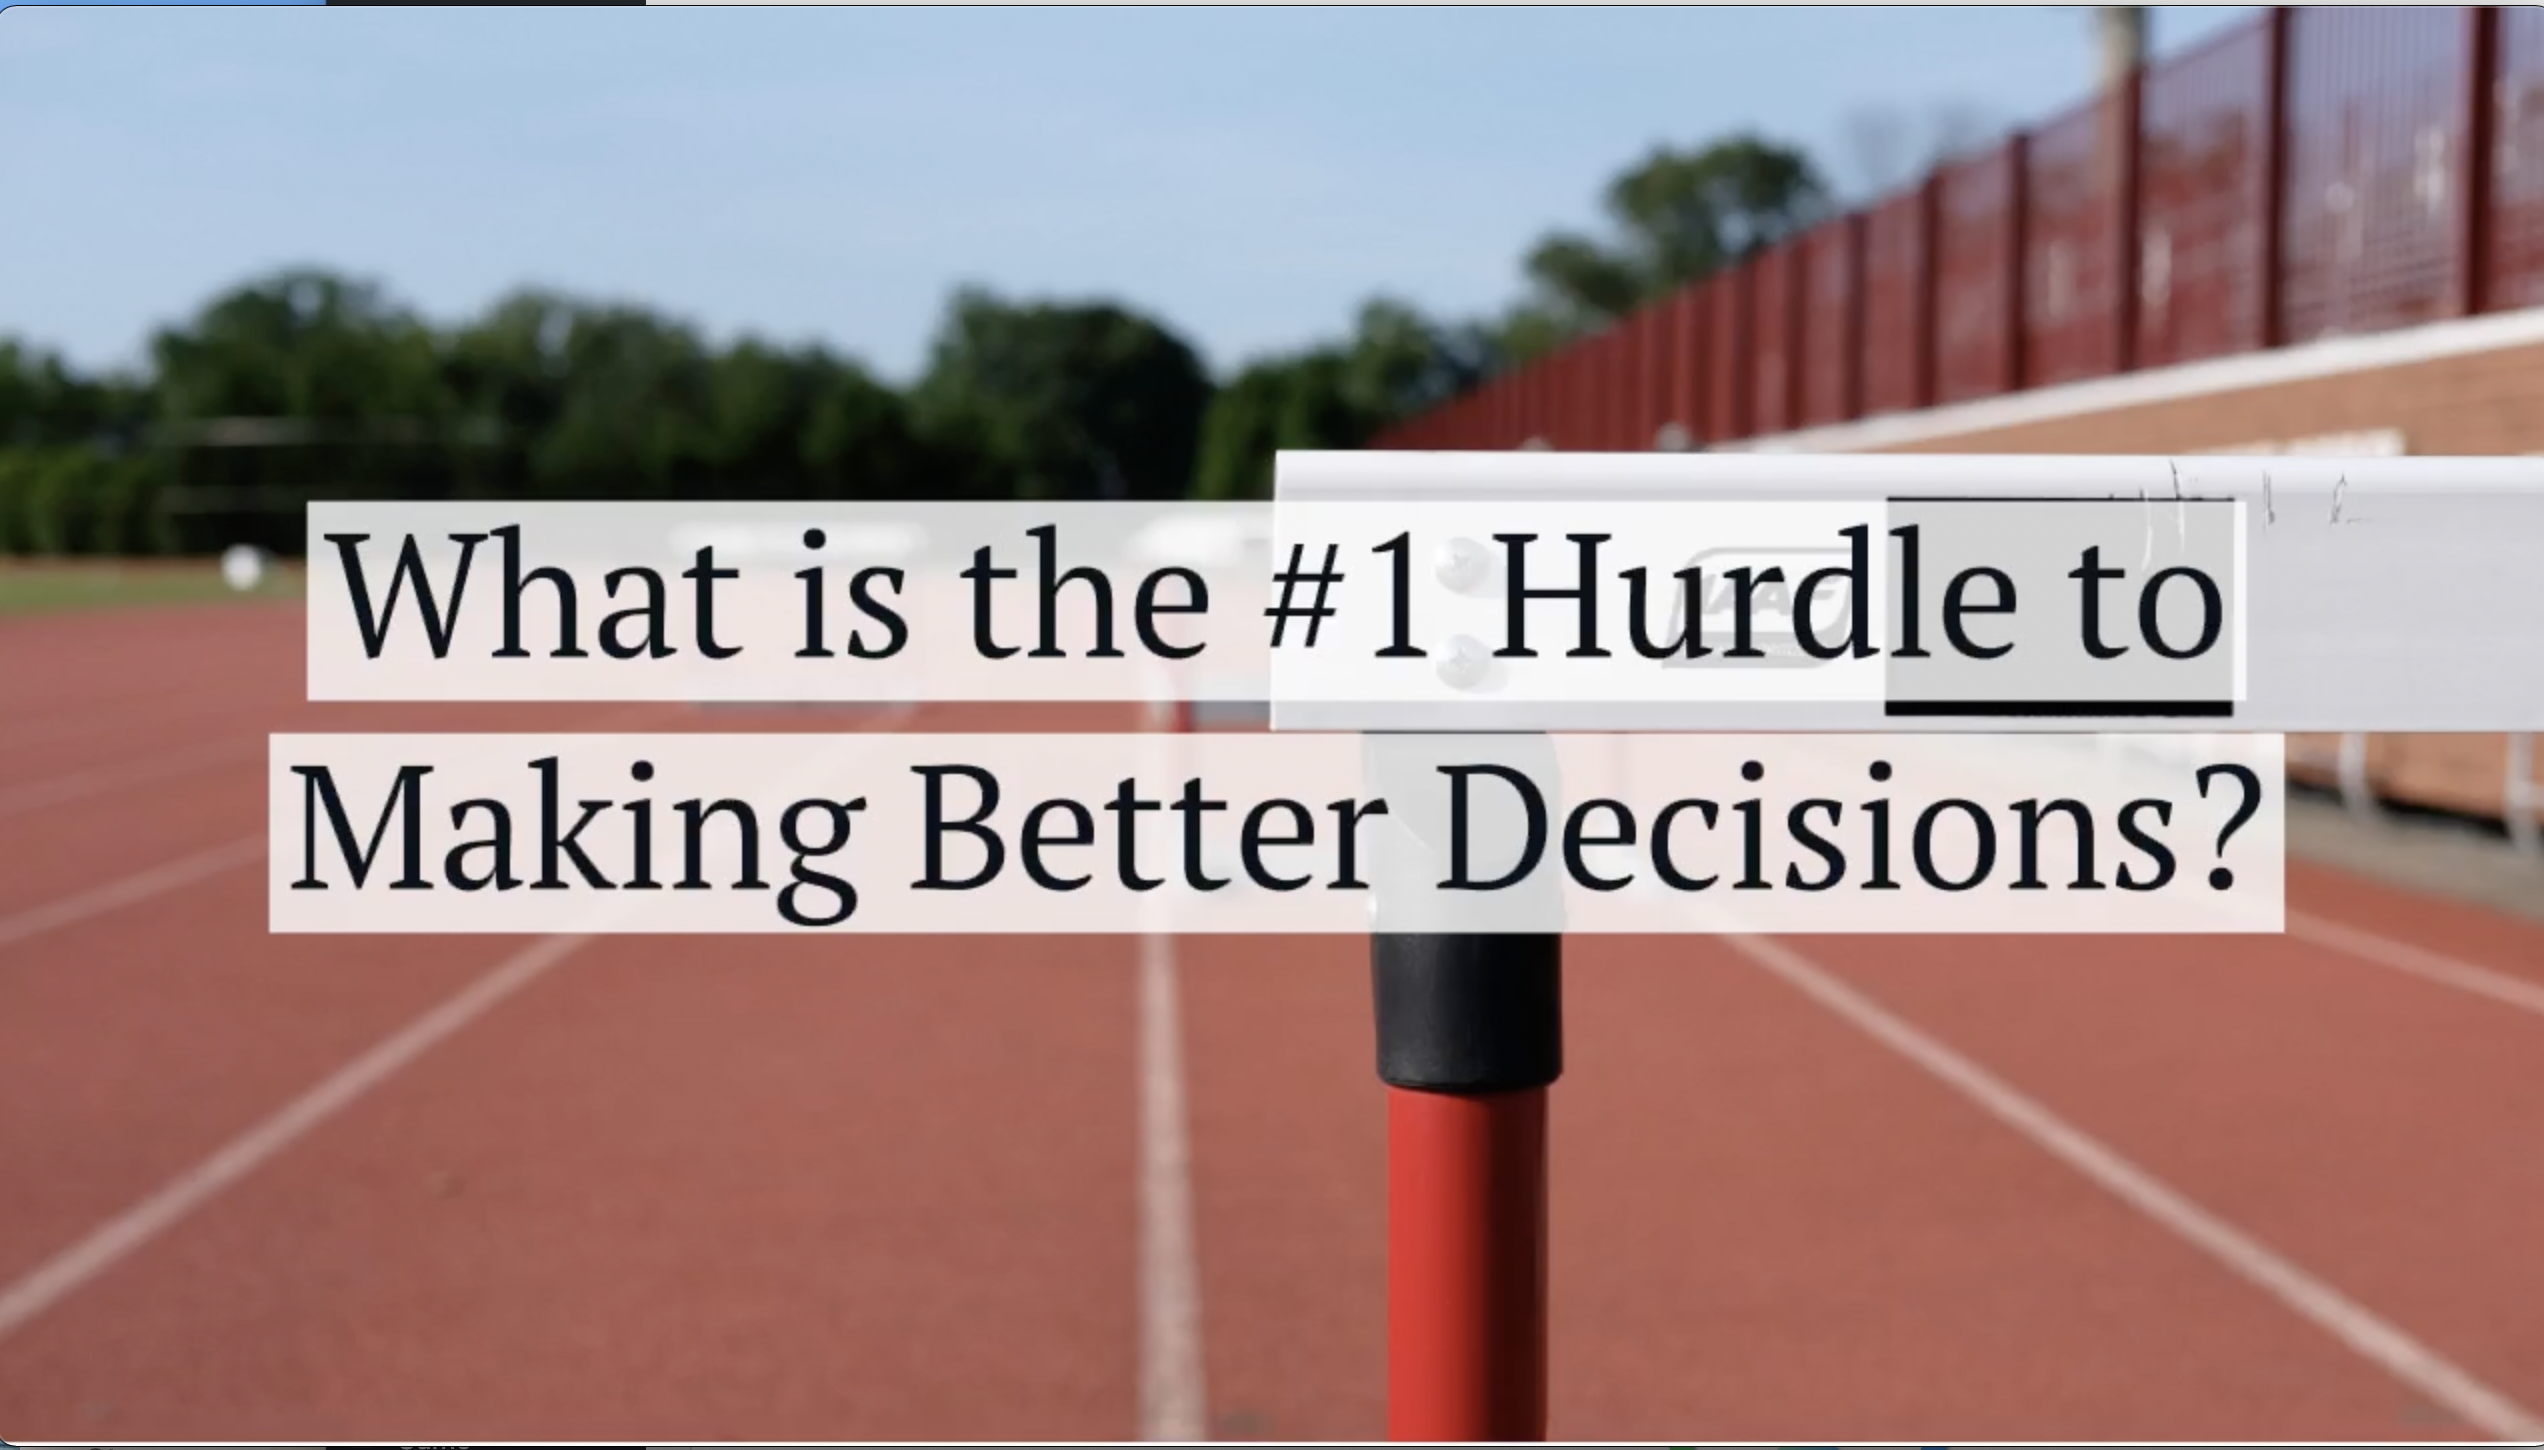 The #1 Hurdle to Making Better Decisions